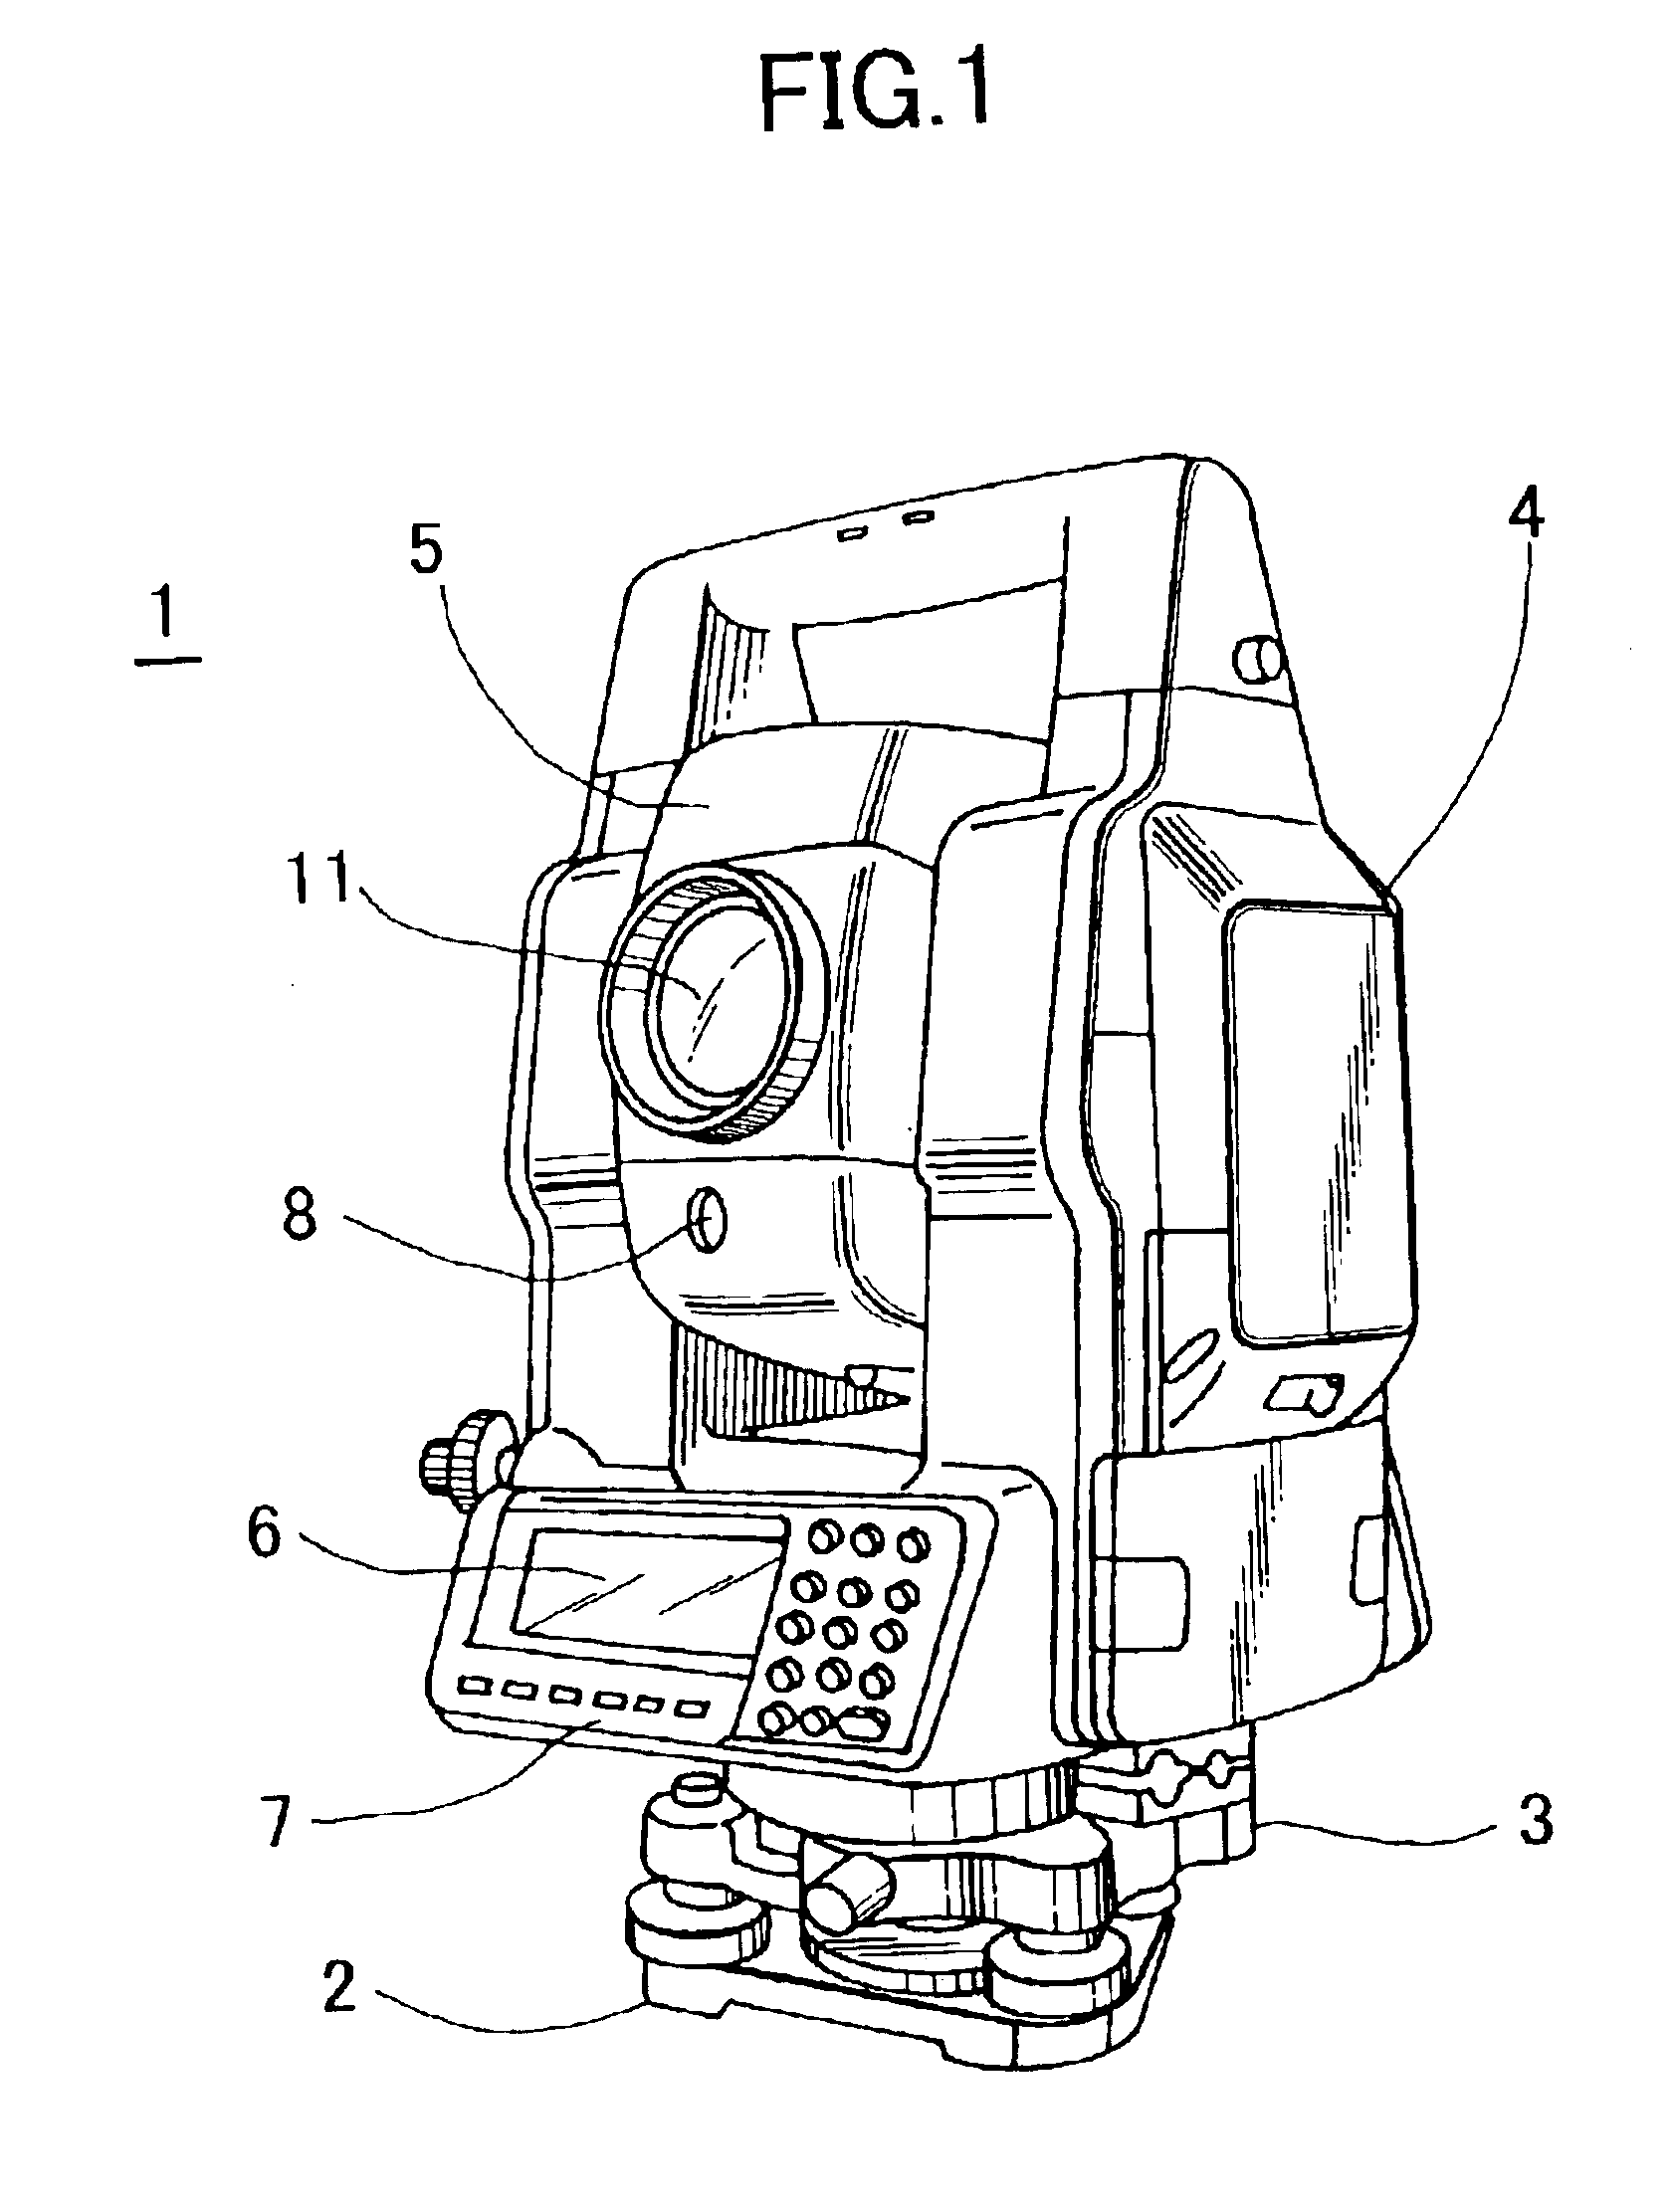 Surveying instrument and method for acquiring image data by using the surveying instrument